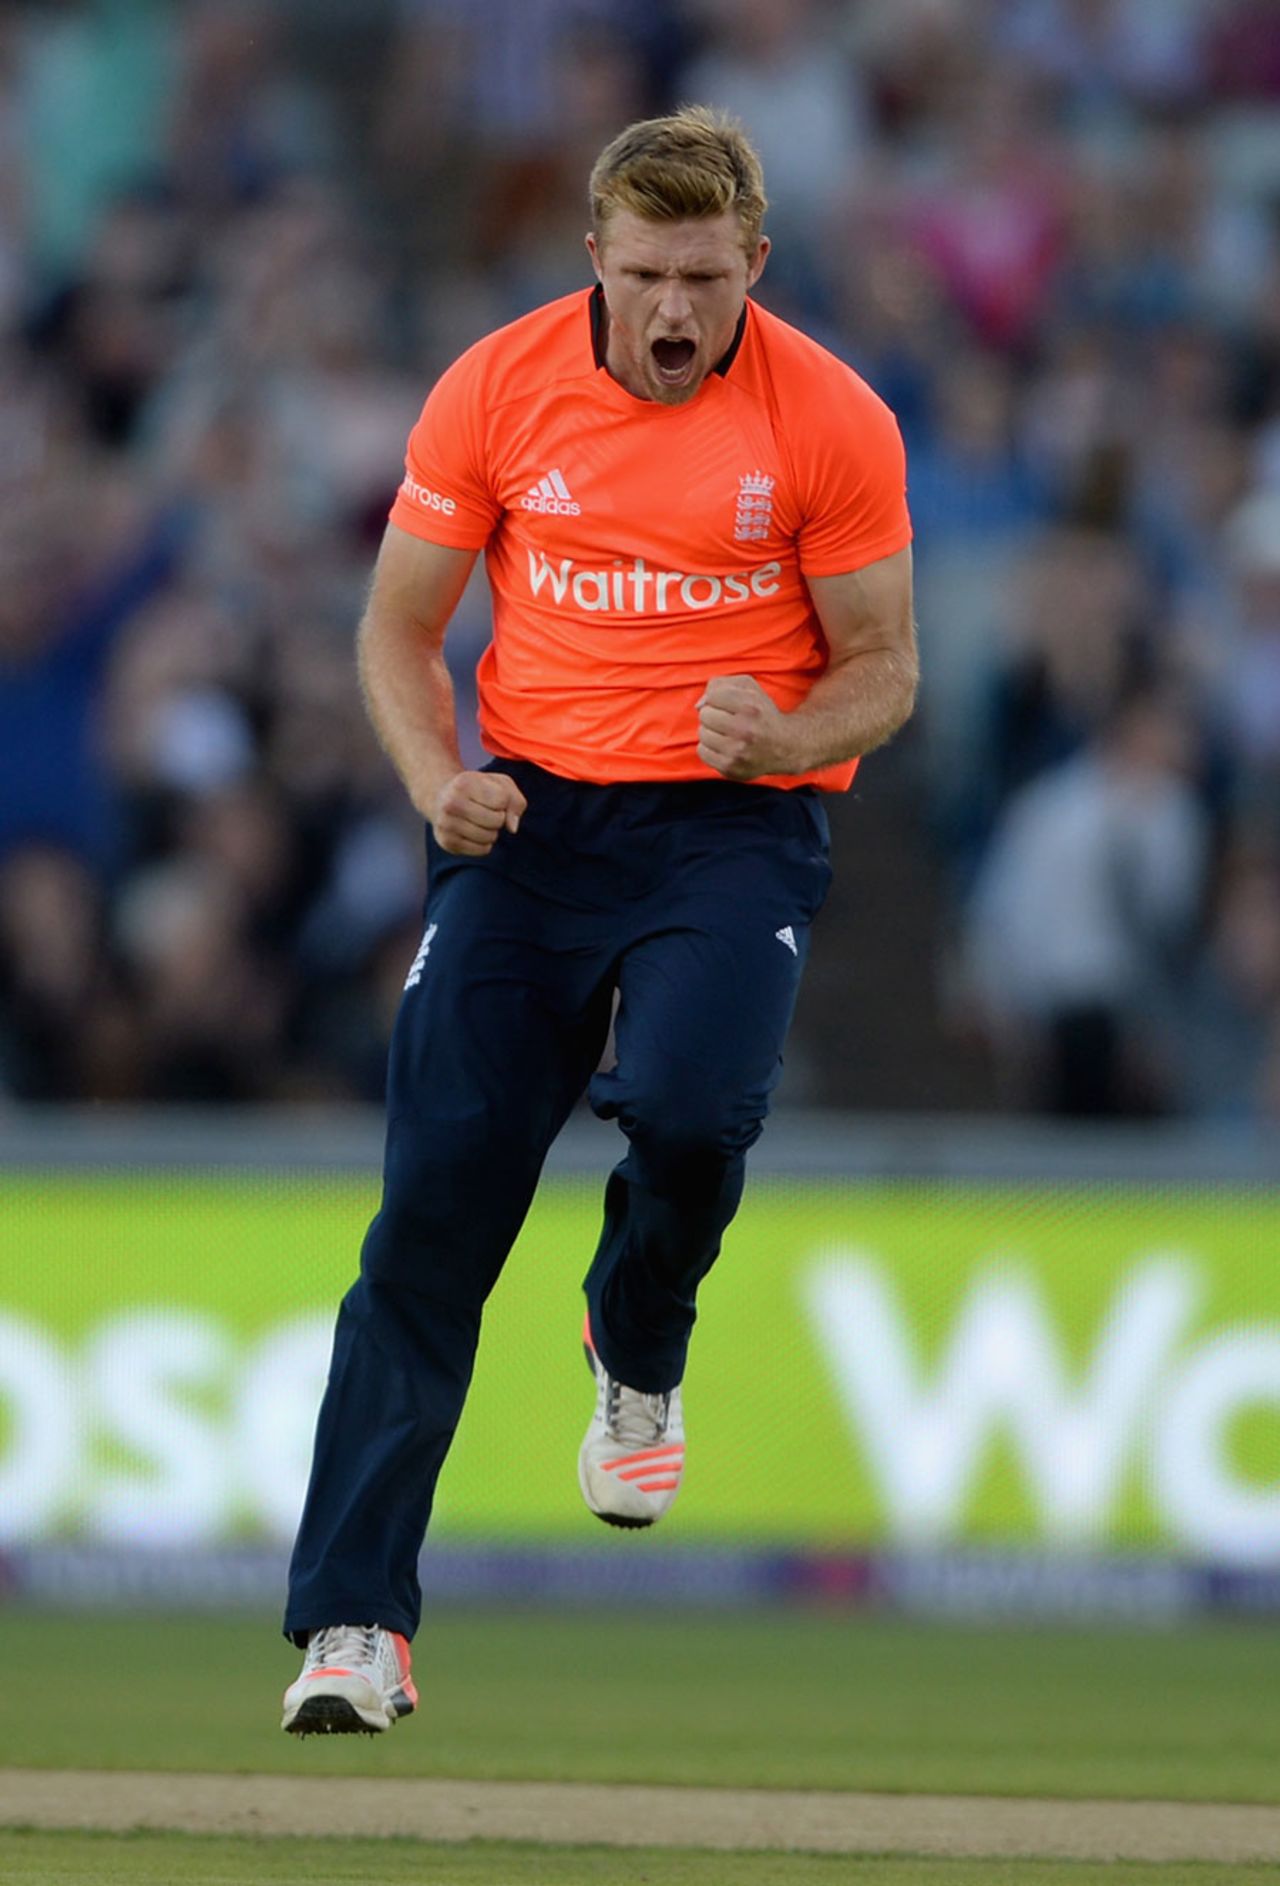 David Willey took a wicket with his third ball, England v New Zealand, only T20, Old Trafford, June 23, 2015